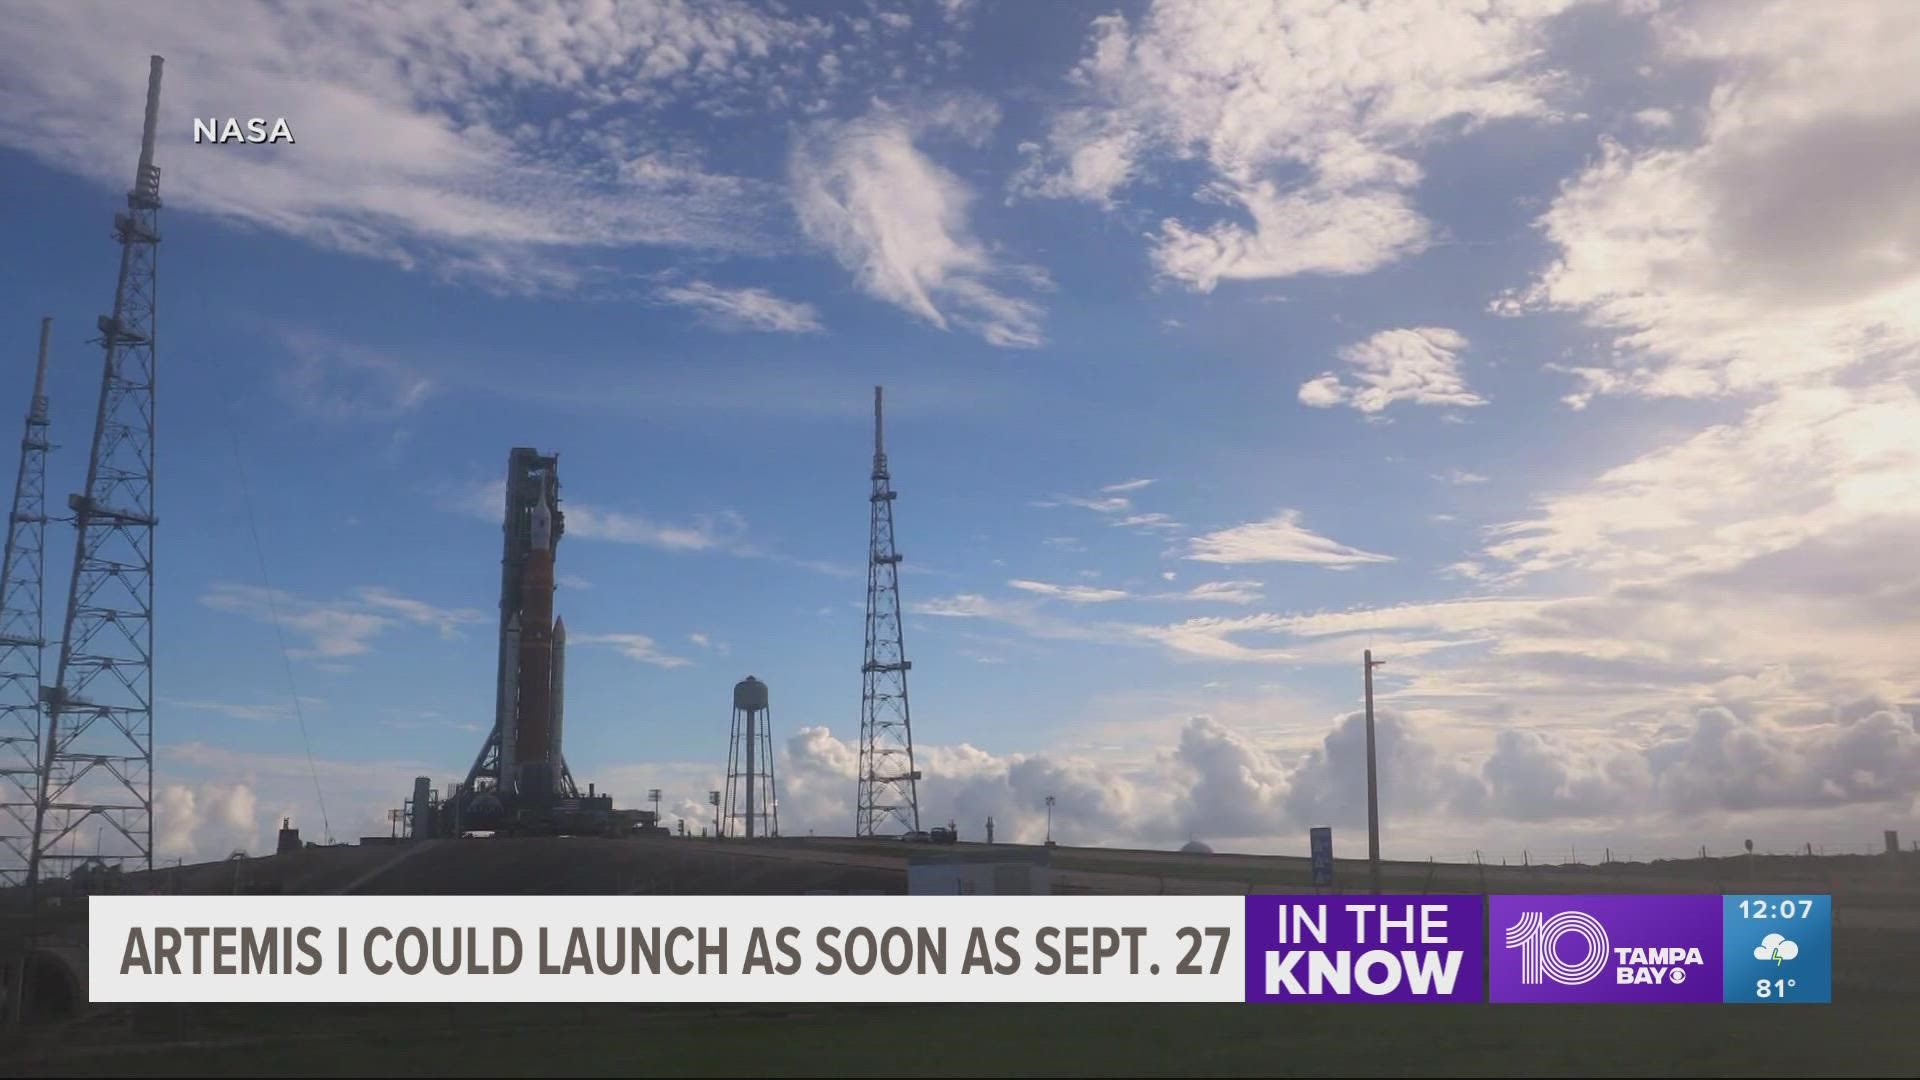 NASA says the earliest possible date is Sept. 27 with Oct. 2 as the backup.